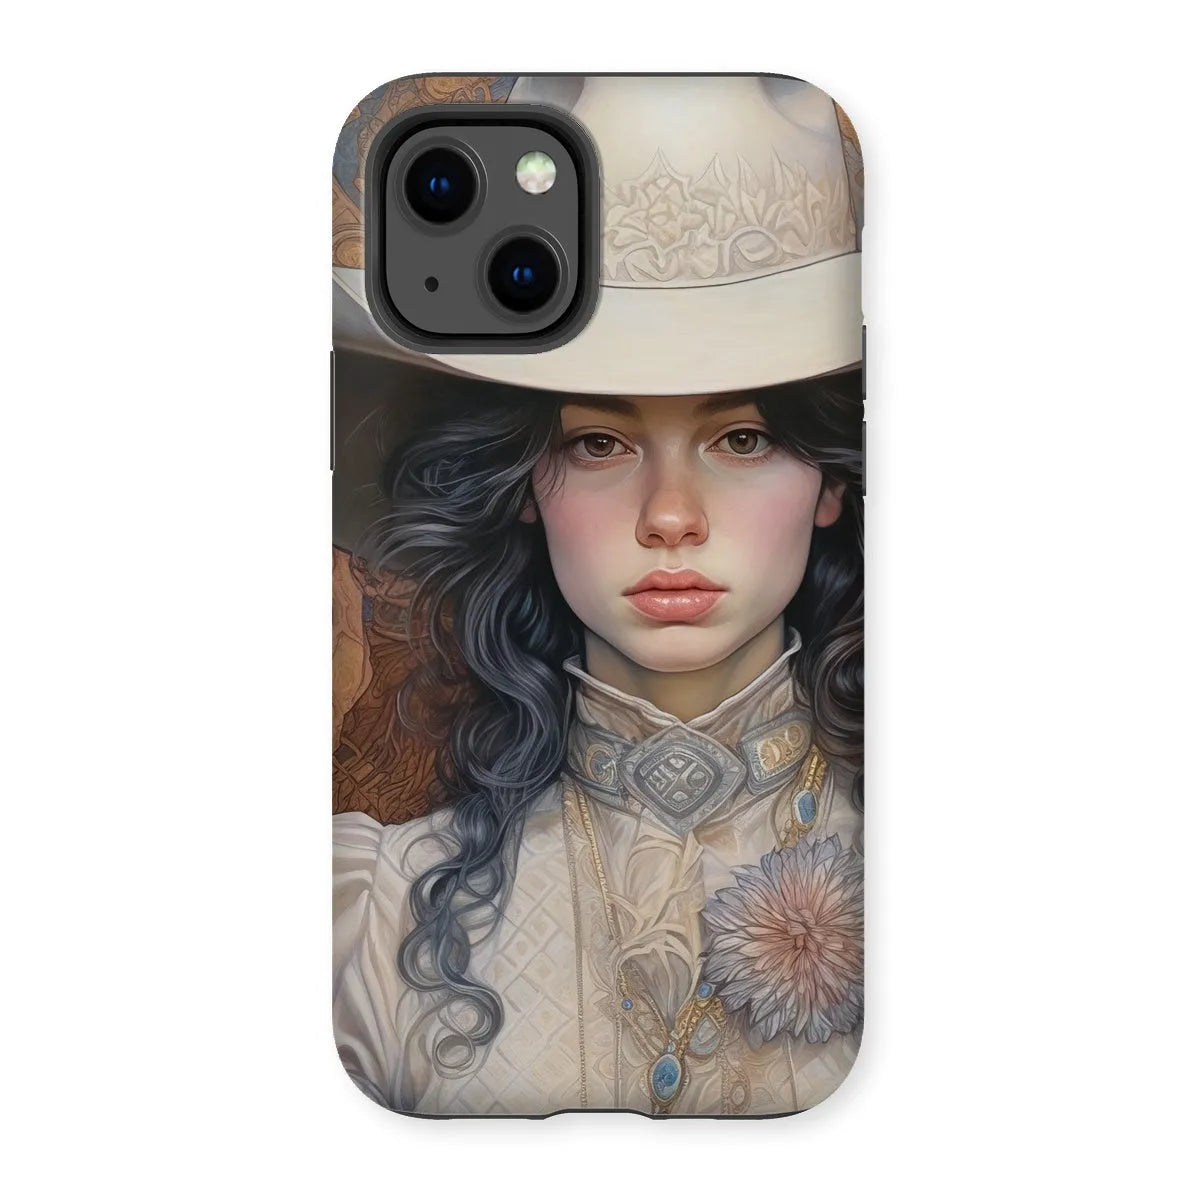 Helena The Lesbian Cowgirl - Sapphic Art Phone Case - Iphone 13 / Matte - Mobile Phone Cases - Aesthetic Art